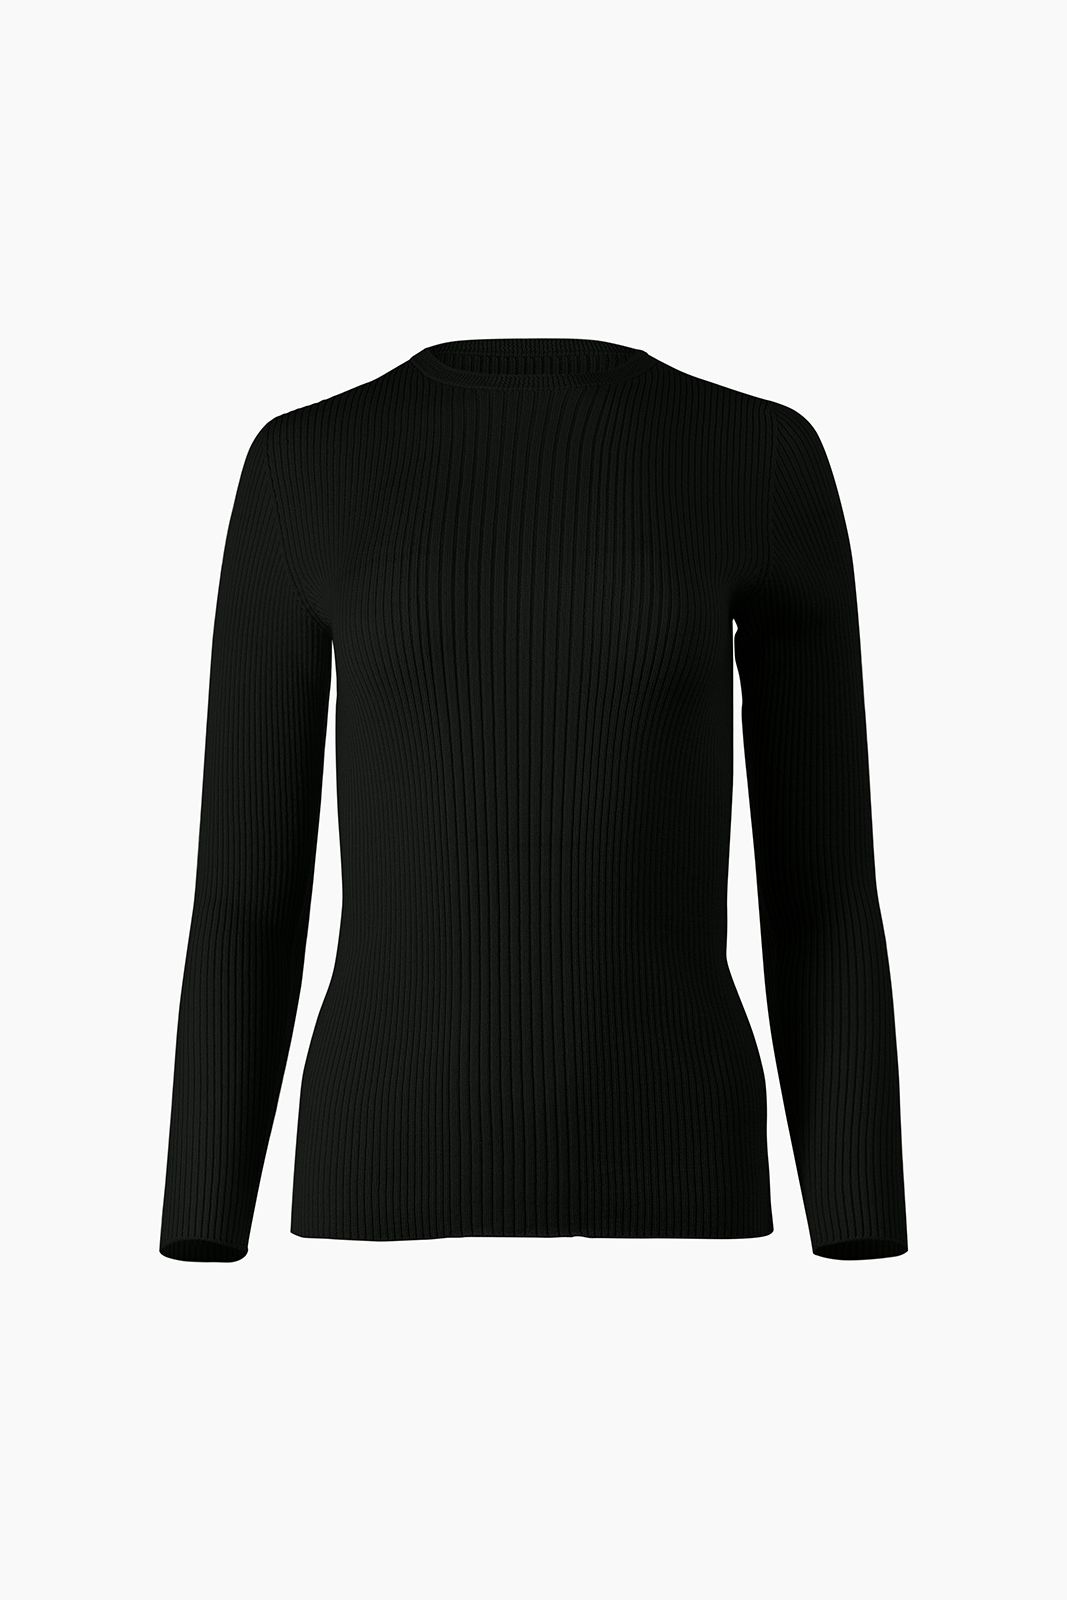 KASS CREW RIBBED PULLOVER - BLACK